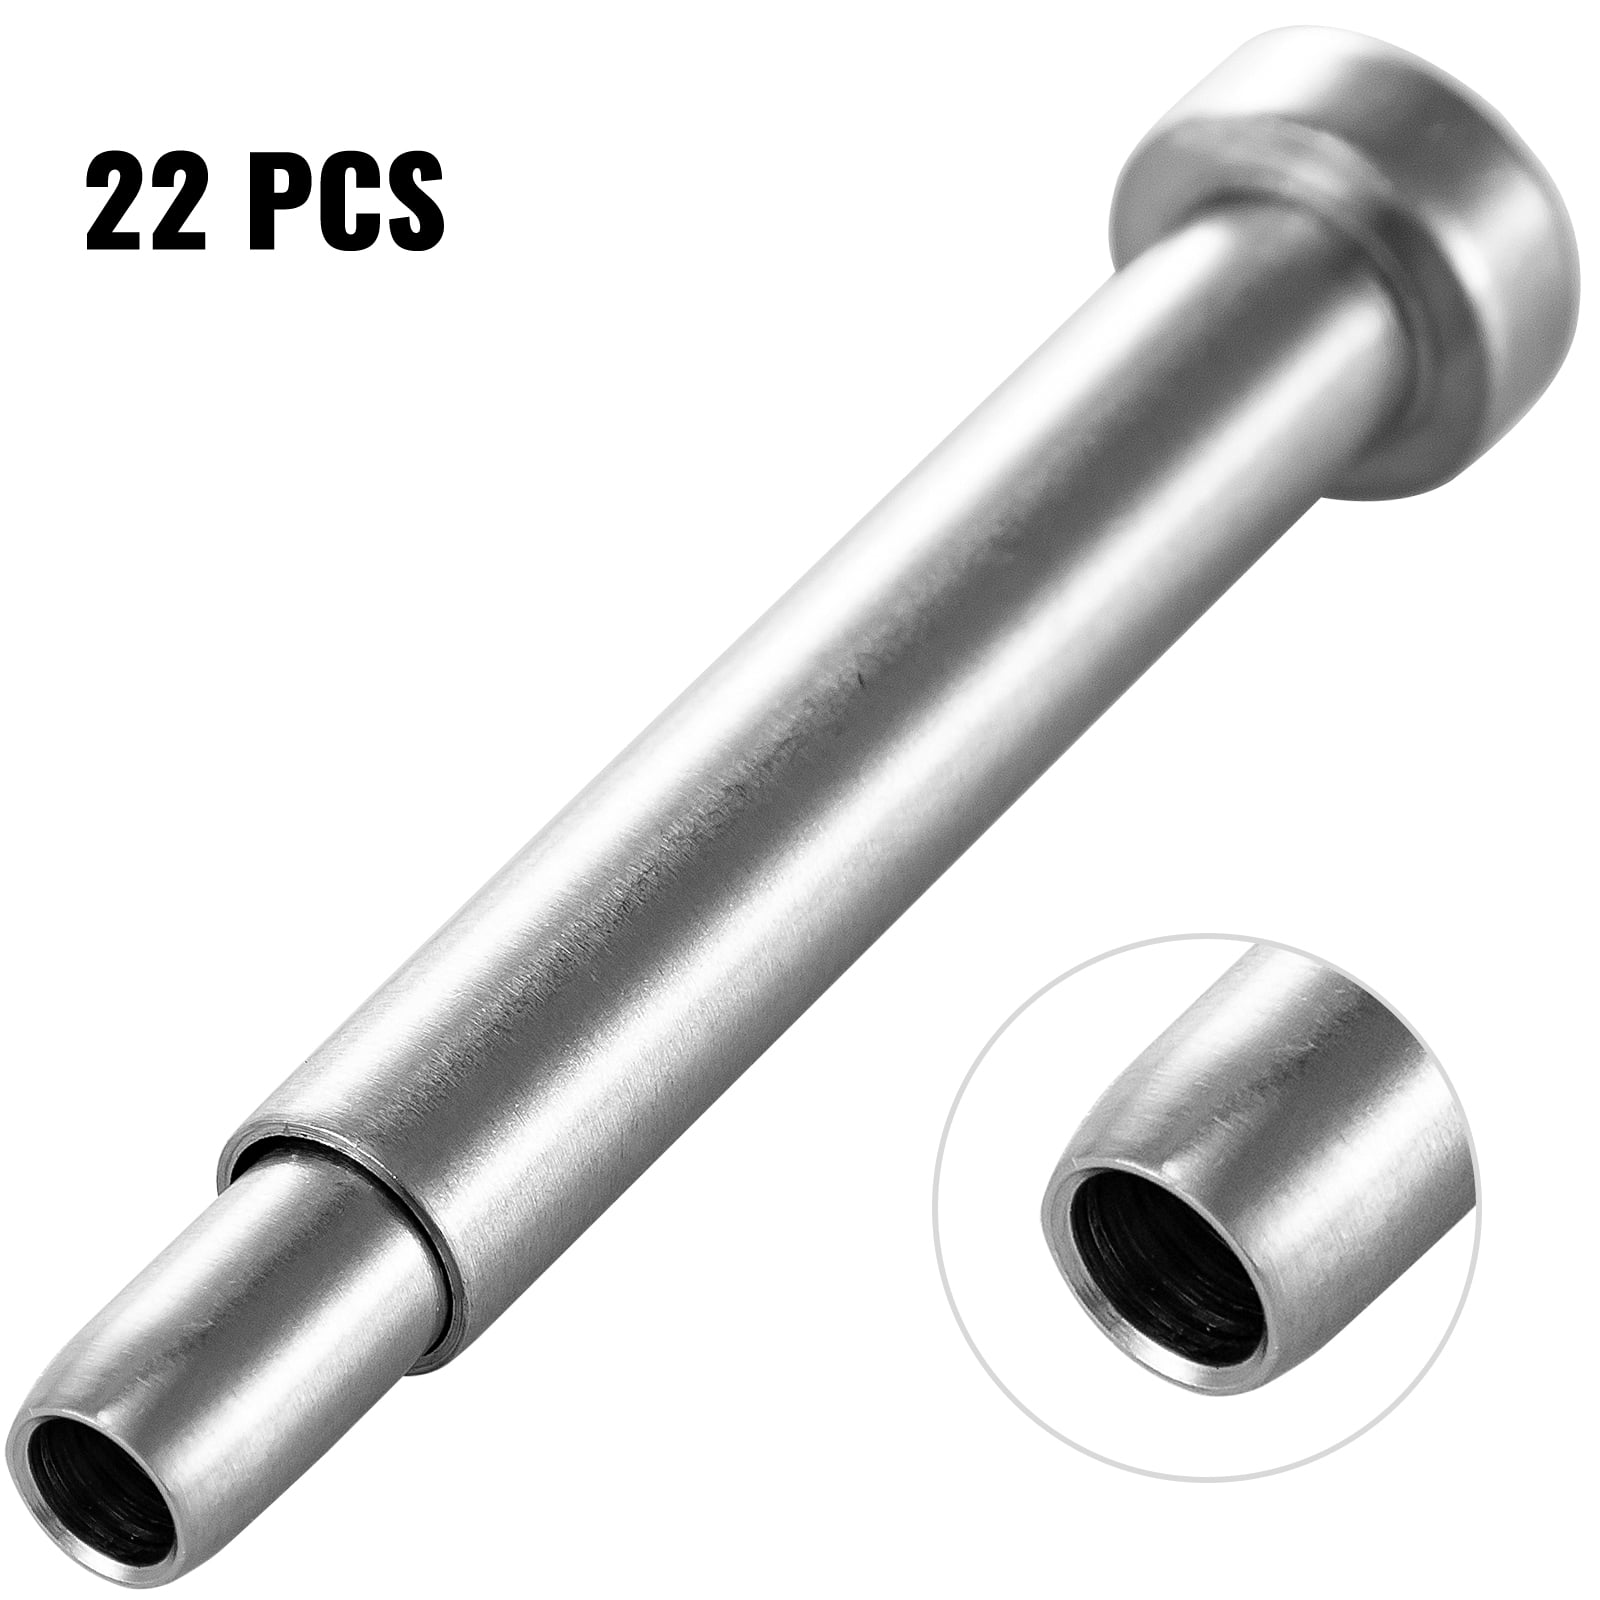 50 Pieces Stainless Steel End Fitting For 3/16" Cable Railing T316